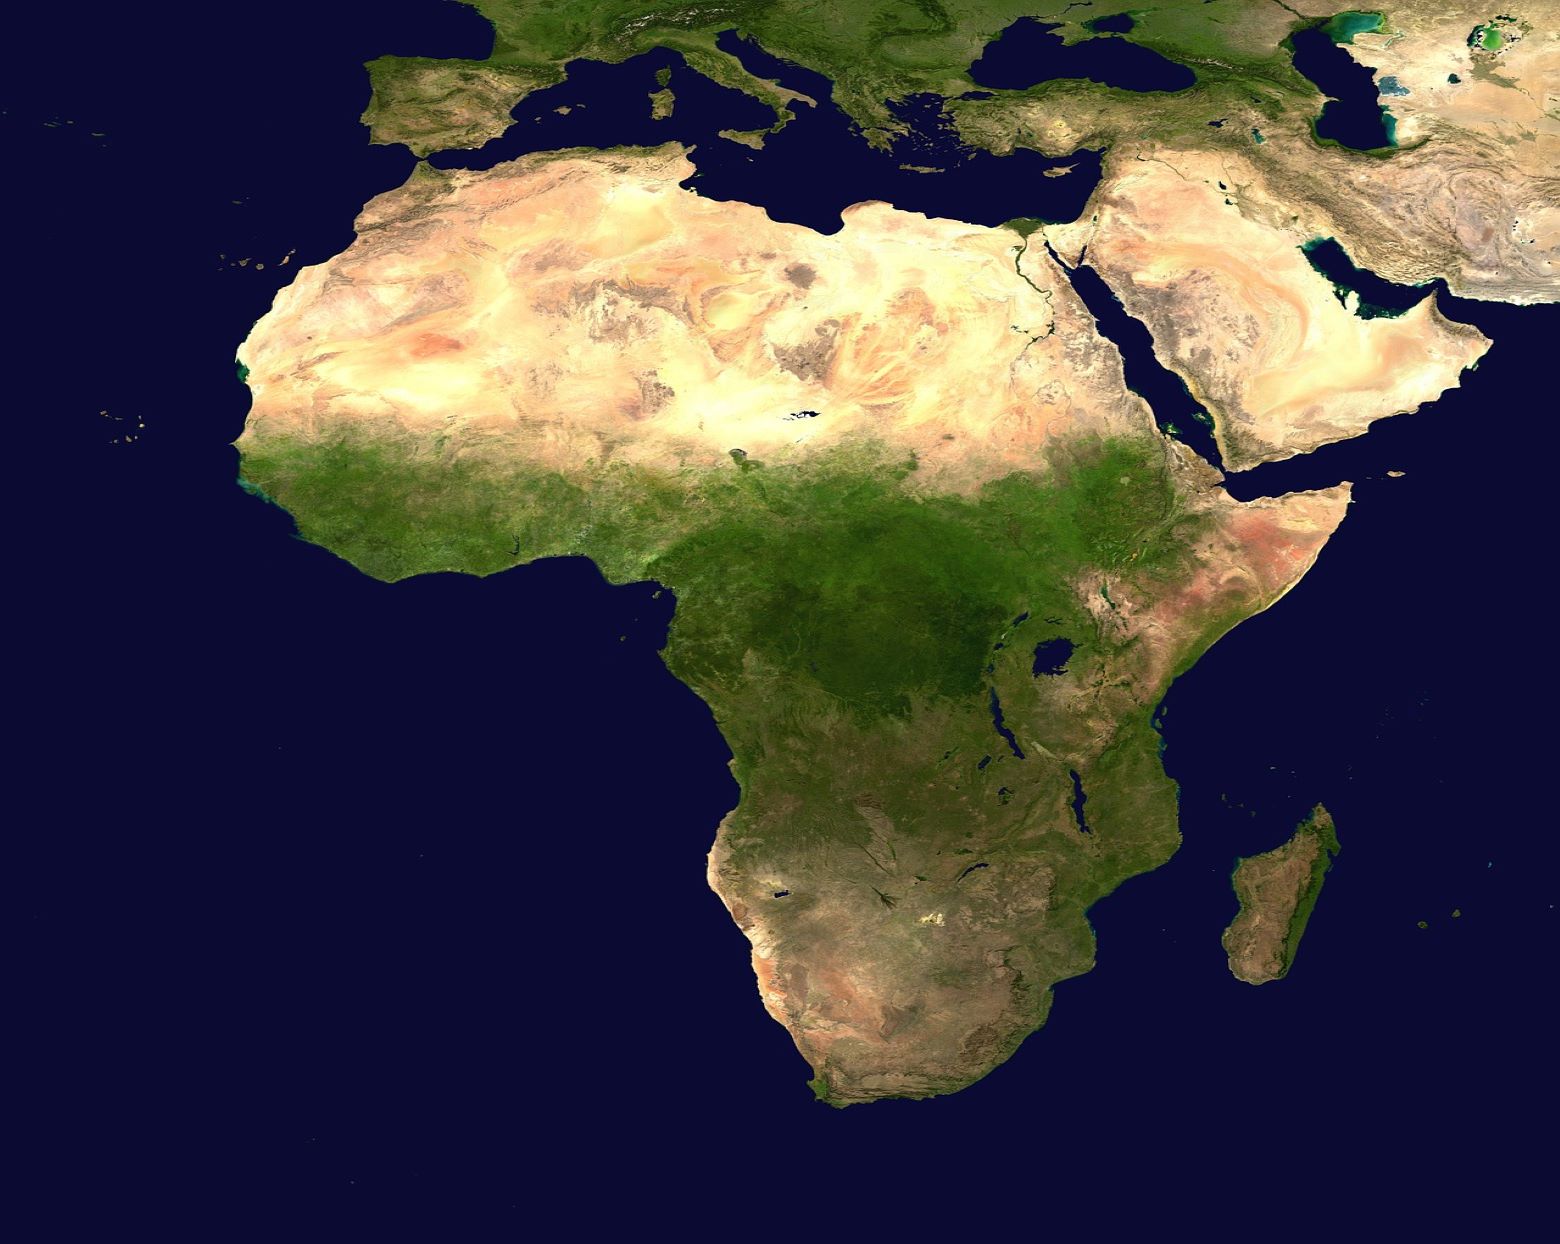 Africa – A Global Opportunity And Not A Threat